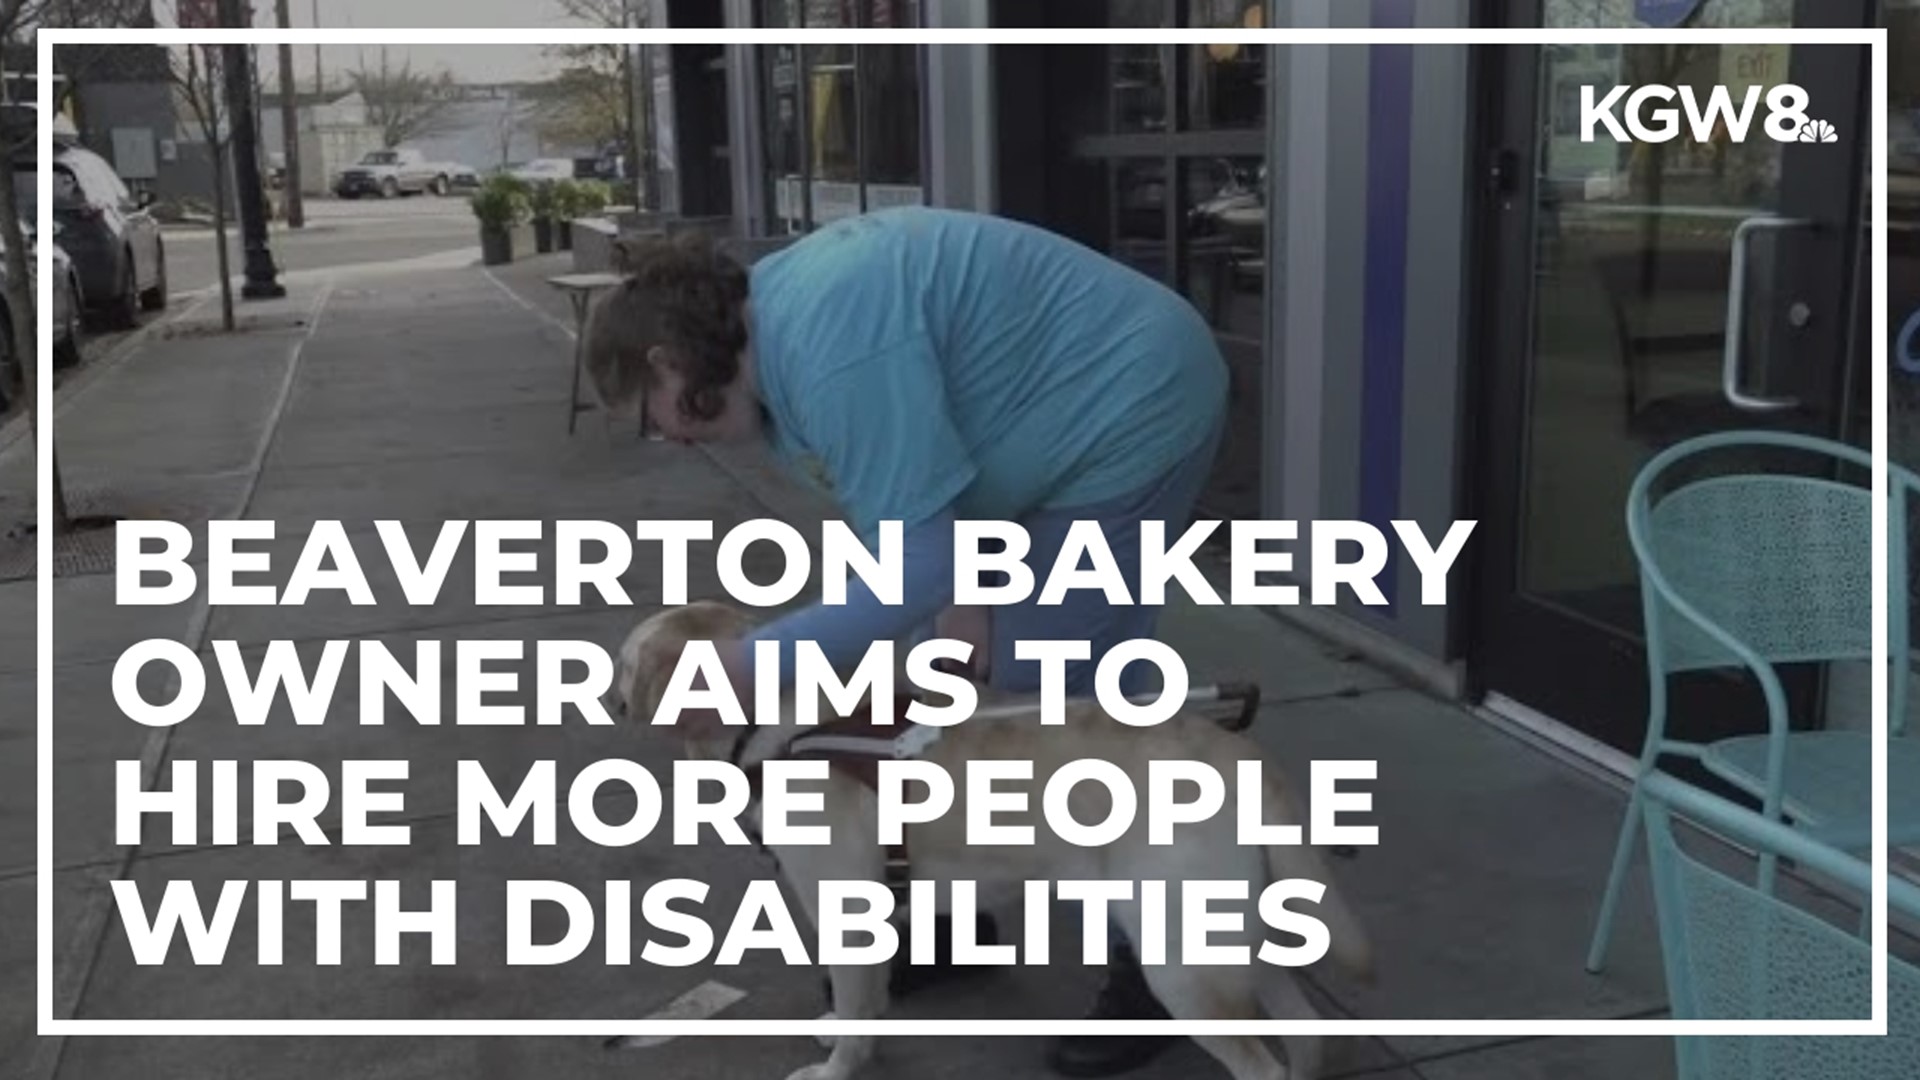 Carina Comer, owner of Carina's Bakery in Beaverton, was born with a tumor that took most of her eyesight. Now she gives back by hiring others with disabilities.